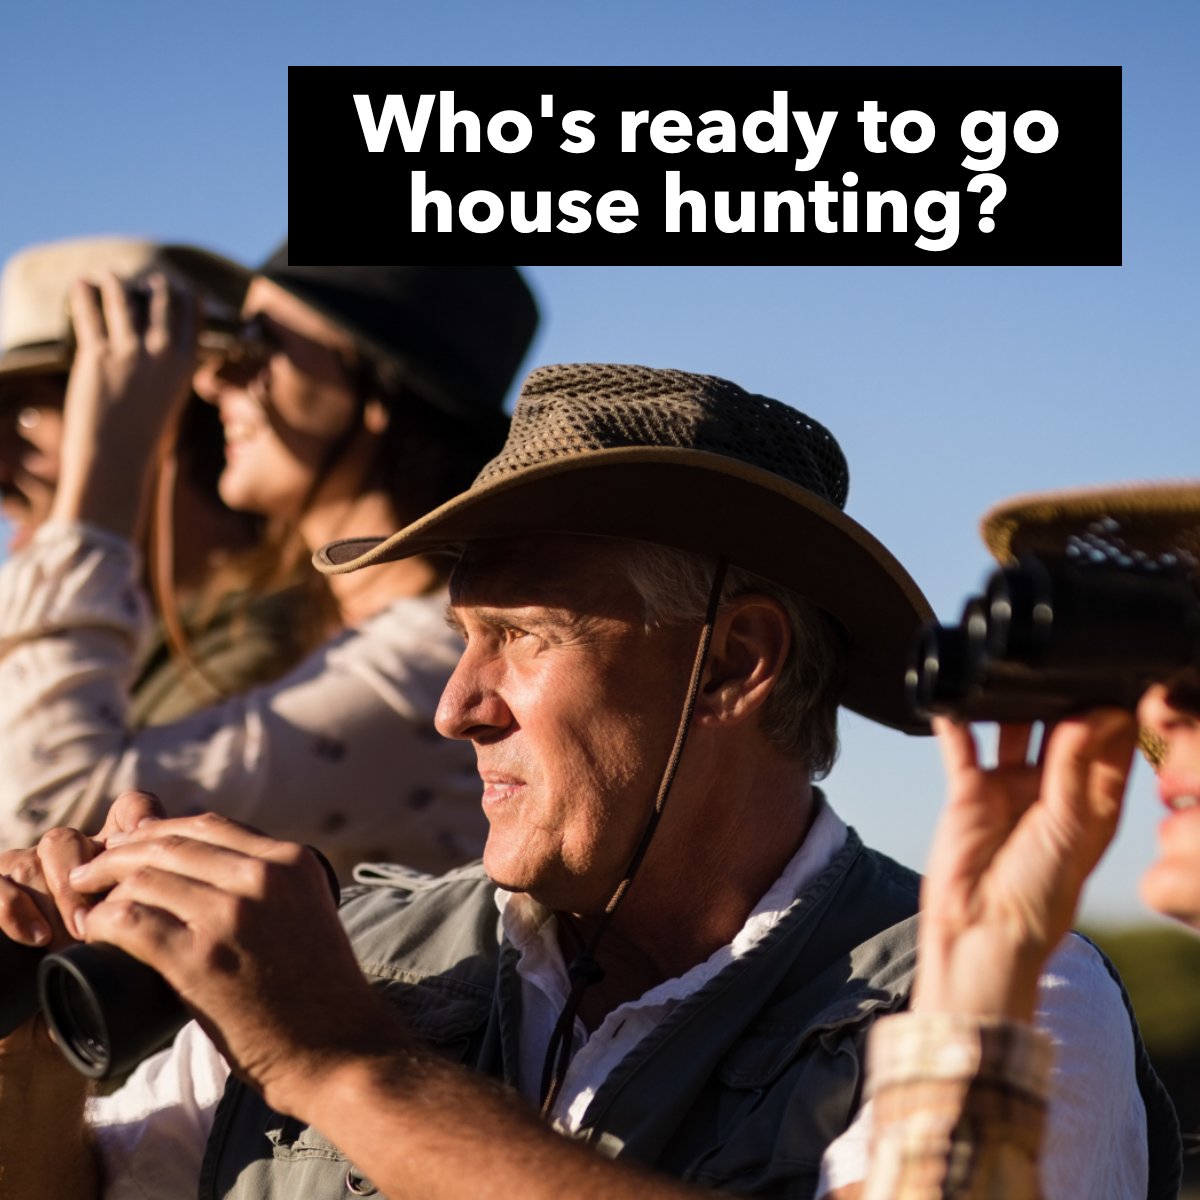 On your mark, get set, go! 🏃‍♂️💨

#househunting #realestate101 #realestatefun #areyouready #realestate
 #whoyouworkwithmatters